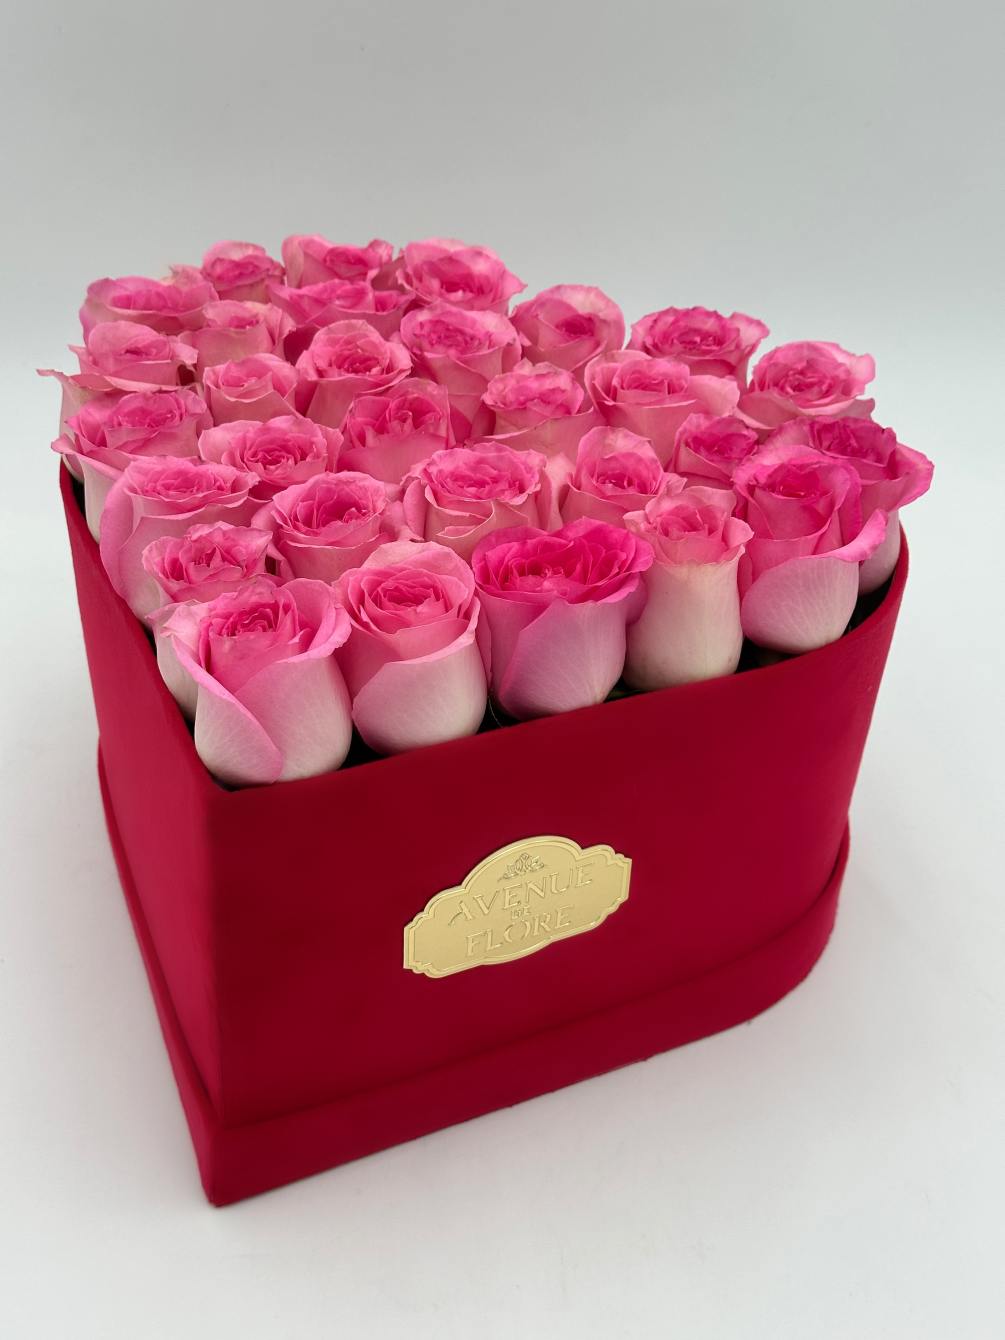 Treat your loved one to the ultimate romantic gesture with our luxurious